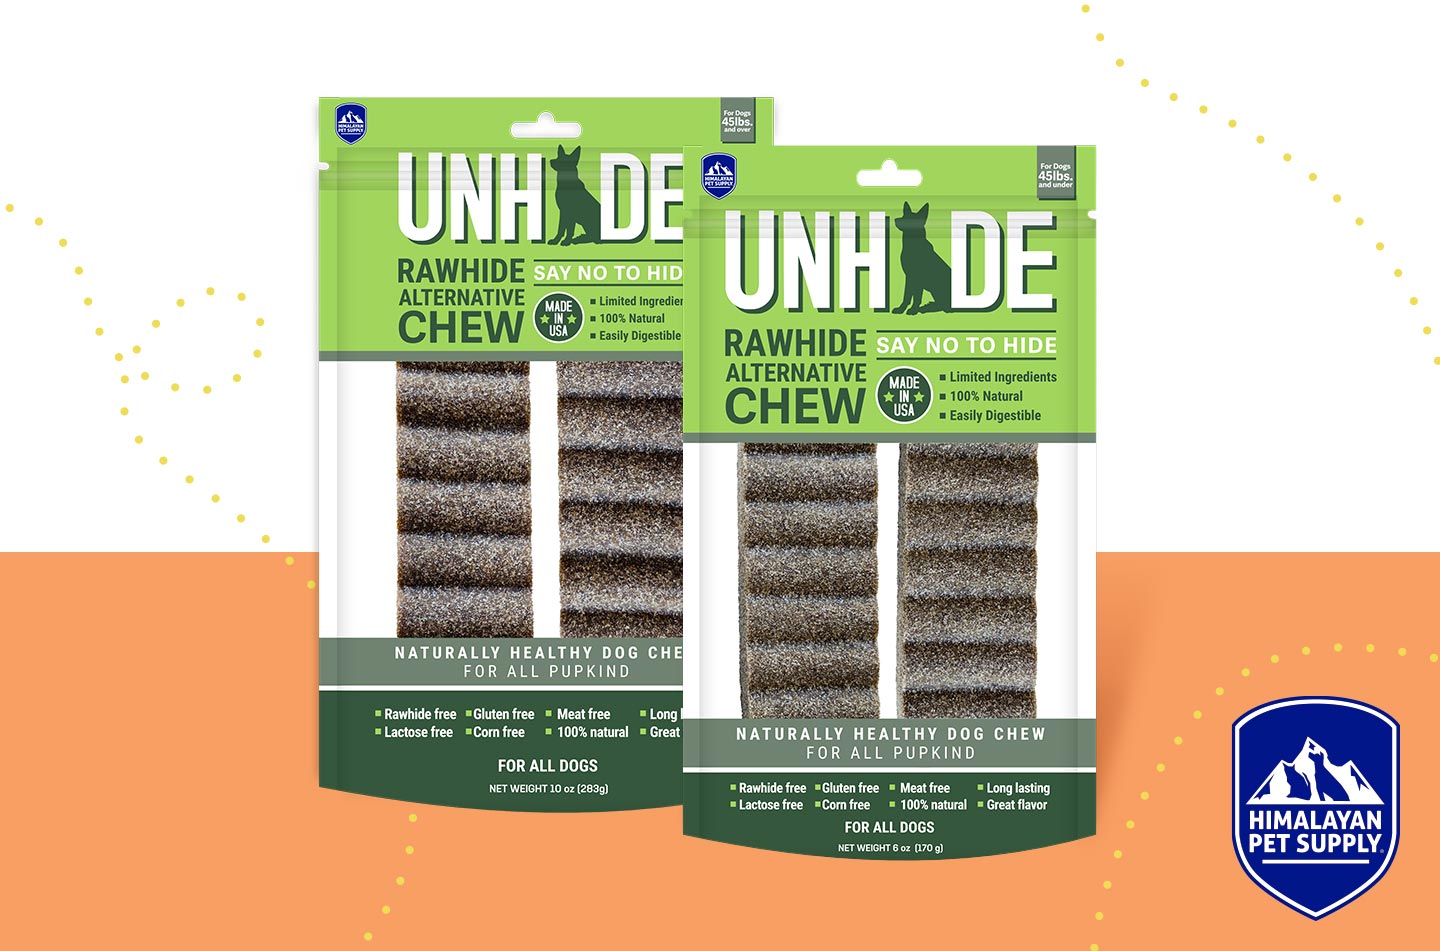 HIMALAYAN PET SUPPLY INTRODUCES UNHIDE CHEW FOR DOGS